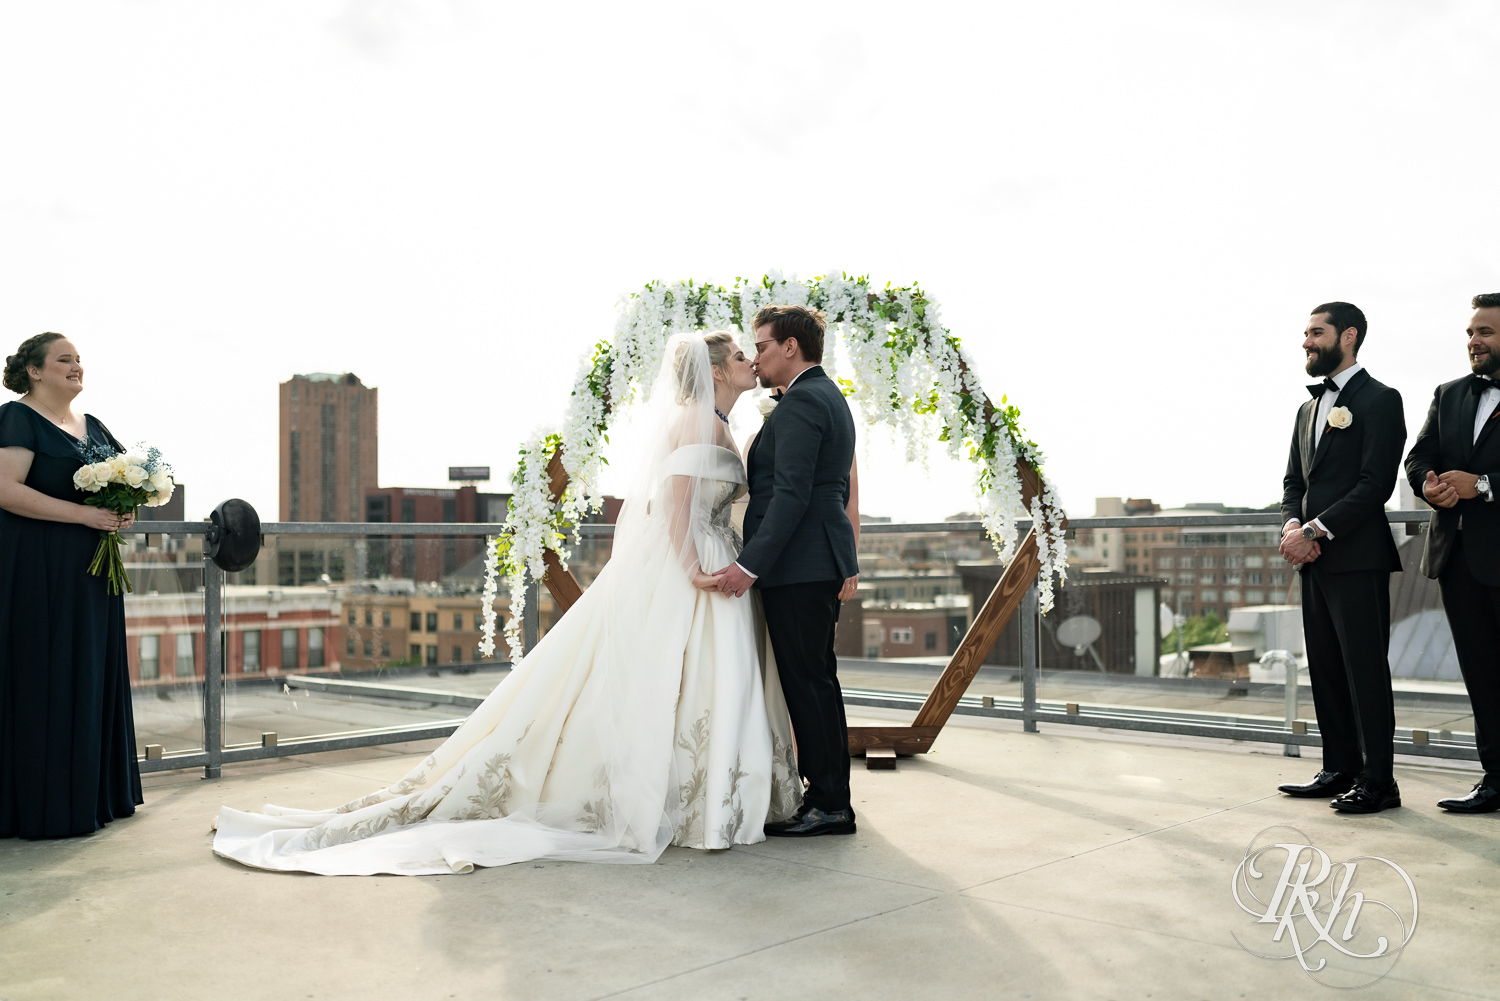 Bride and groom share first kiss on the rootop at Abulae in Saint Paul, Minnesota.